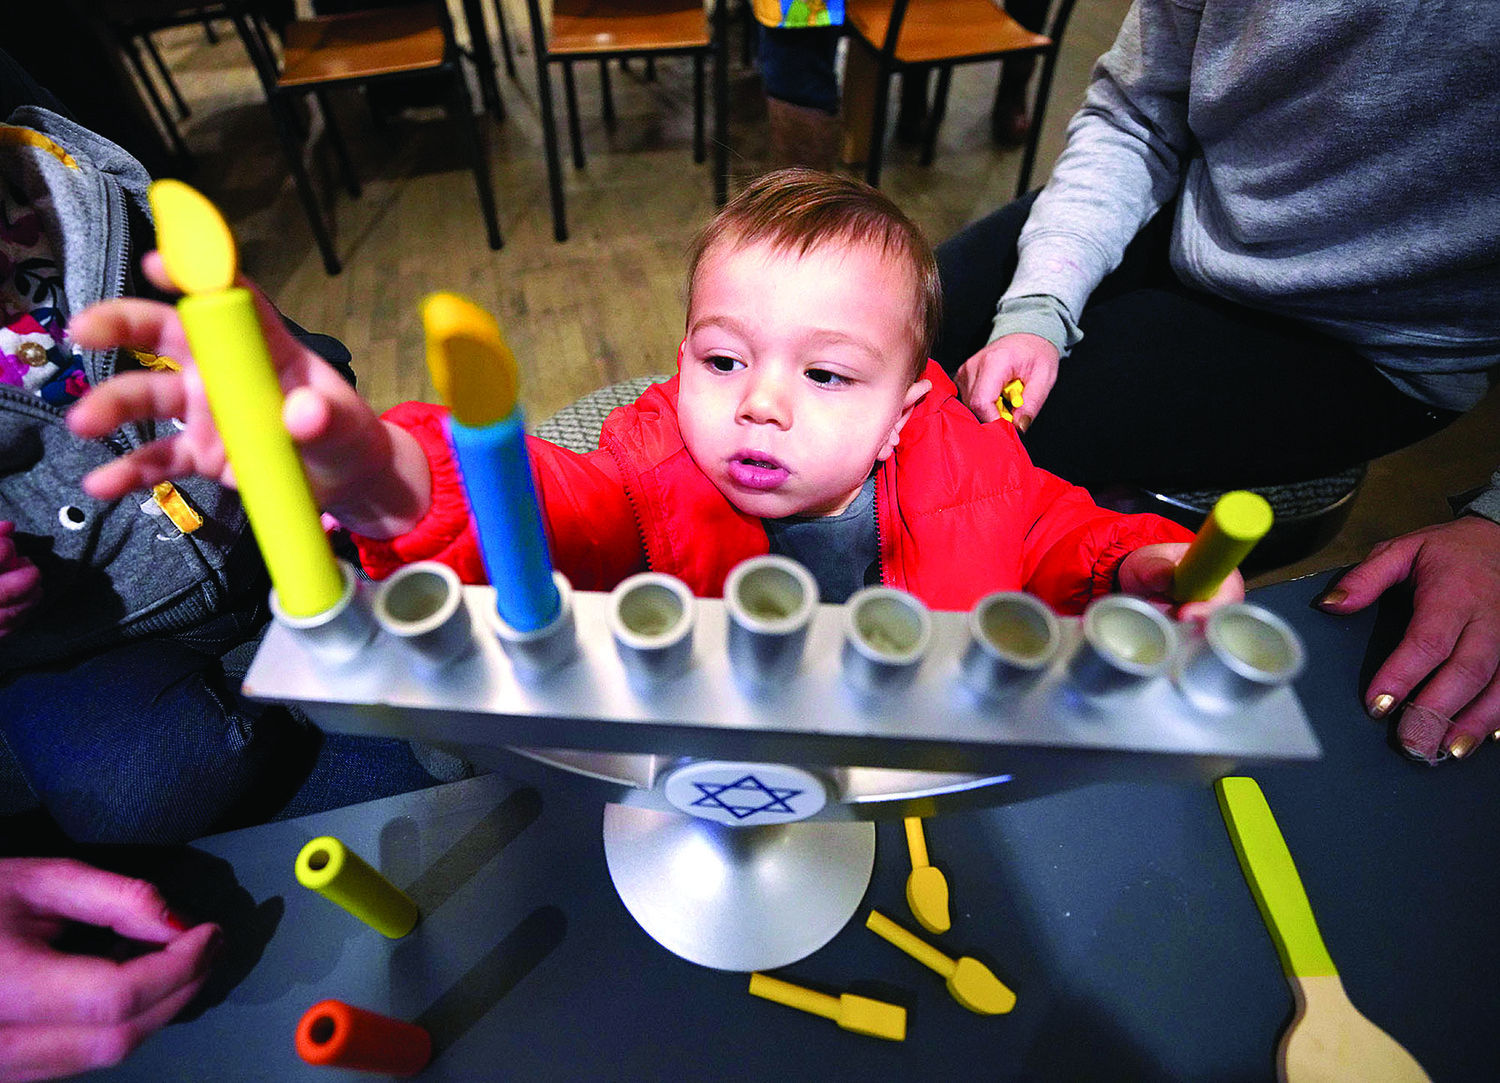 PROVIDENCE, RI--Friday, December 20, 2019--Story time at Knead Donuts on Elmgrove Ave.  PICTURED IS: Nathan Gutman, 15-months-old, playing with a menorah, after story time.  Photo Glenn Osmundson/Jewish Rhode Island